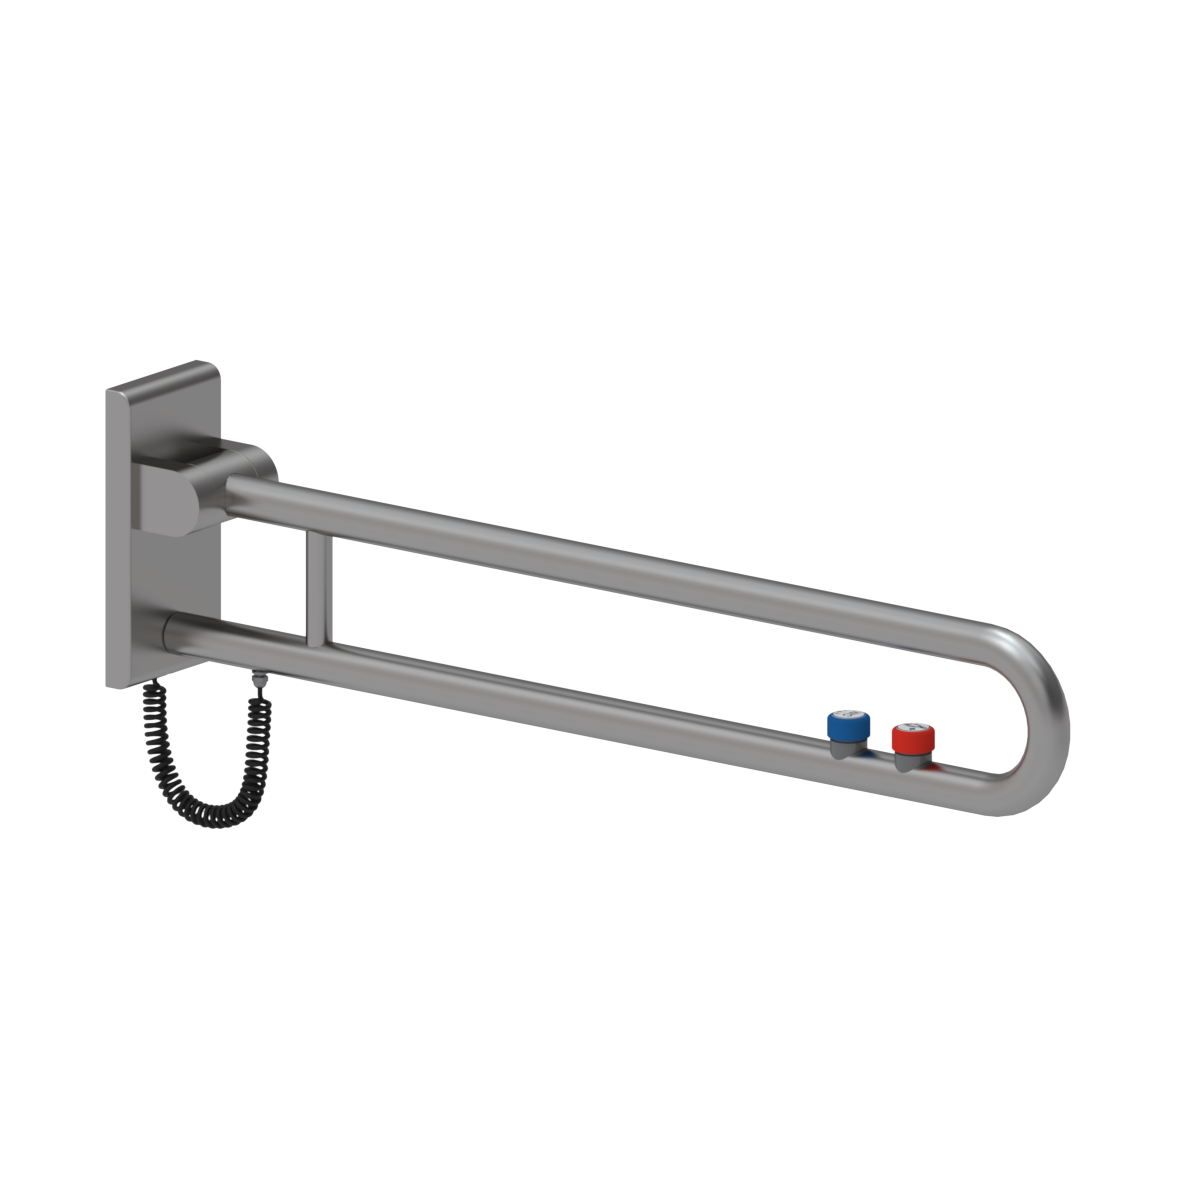 Inox Care Lift-up support rail vario, with base plate, with 2 E-buttons (WC and call: NOC and NCC), left and right, L = 850 mm, connection covered with mounting plate, Stainless steel